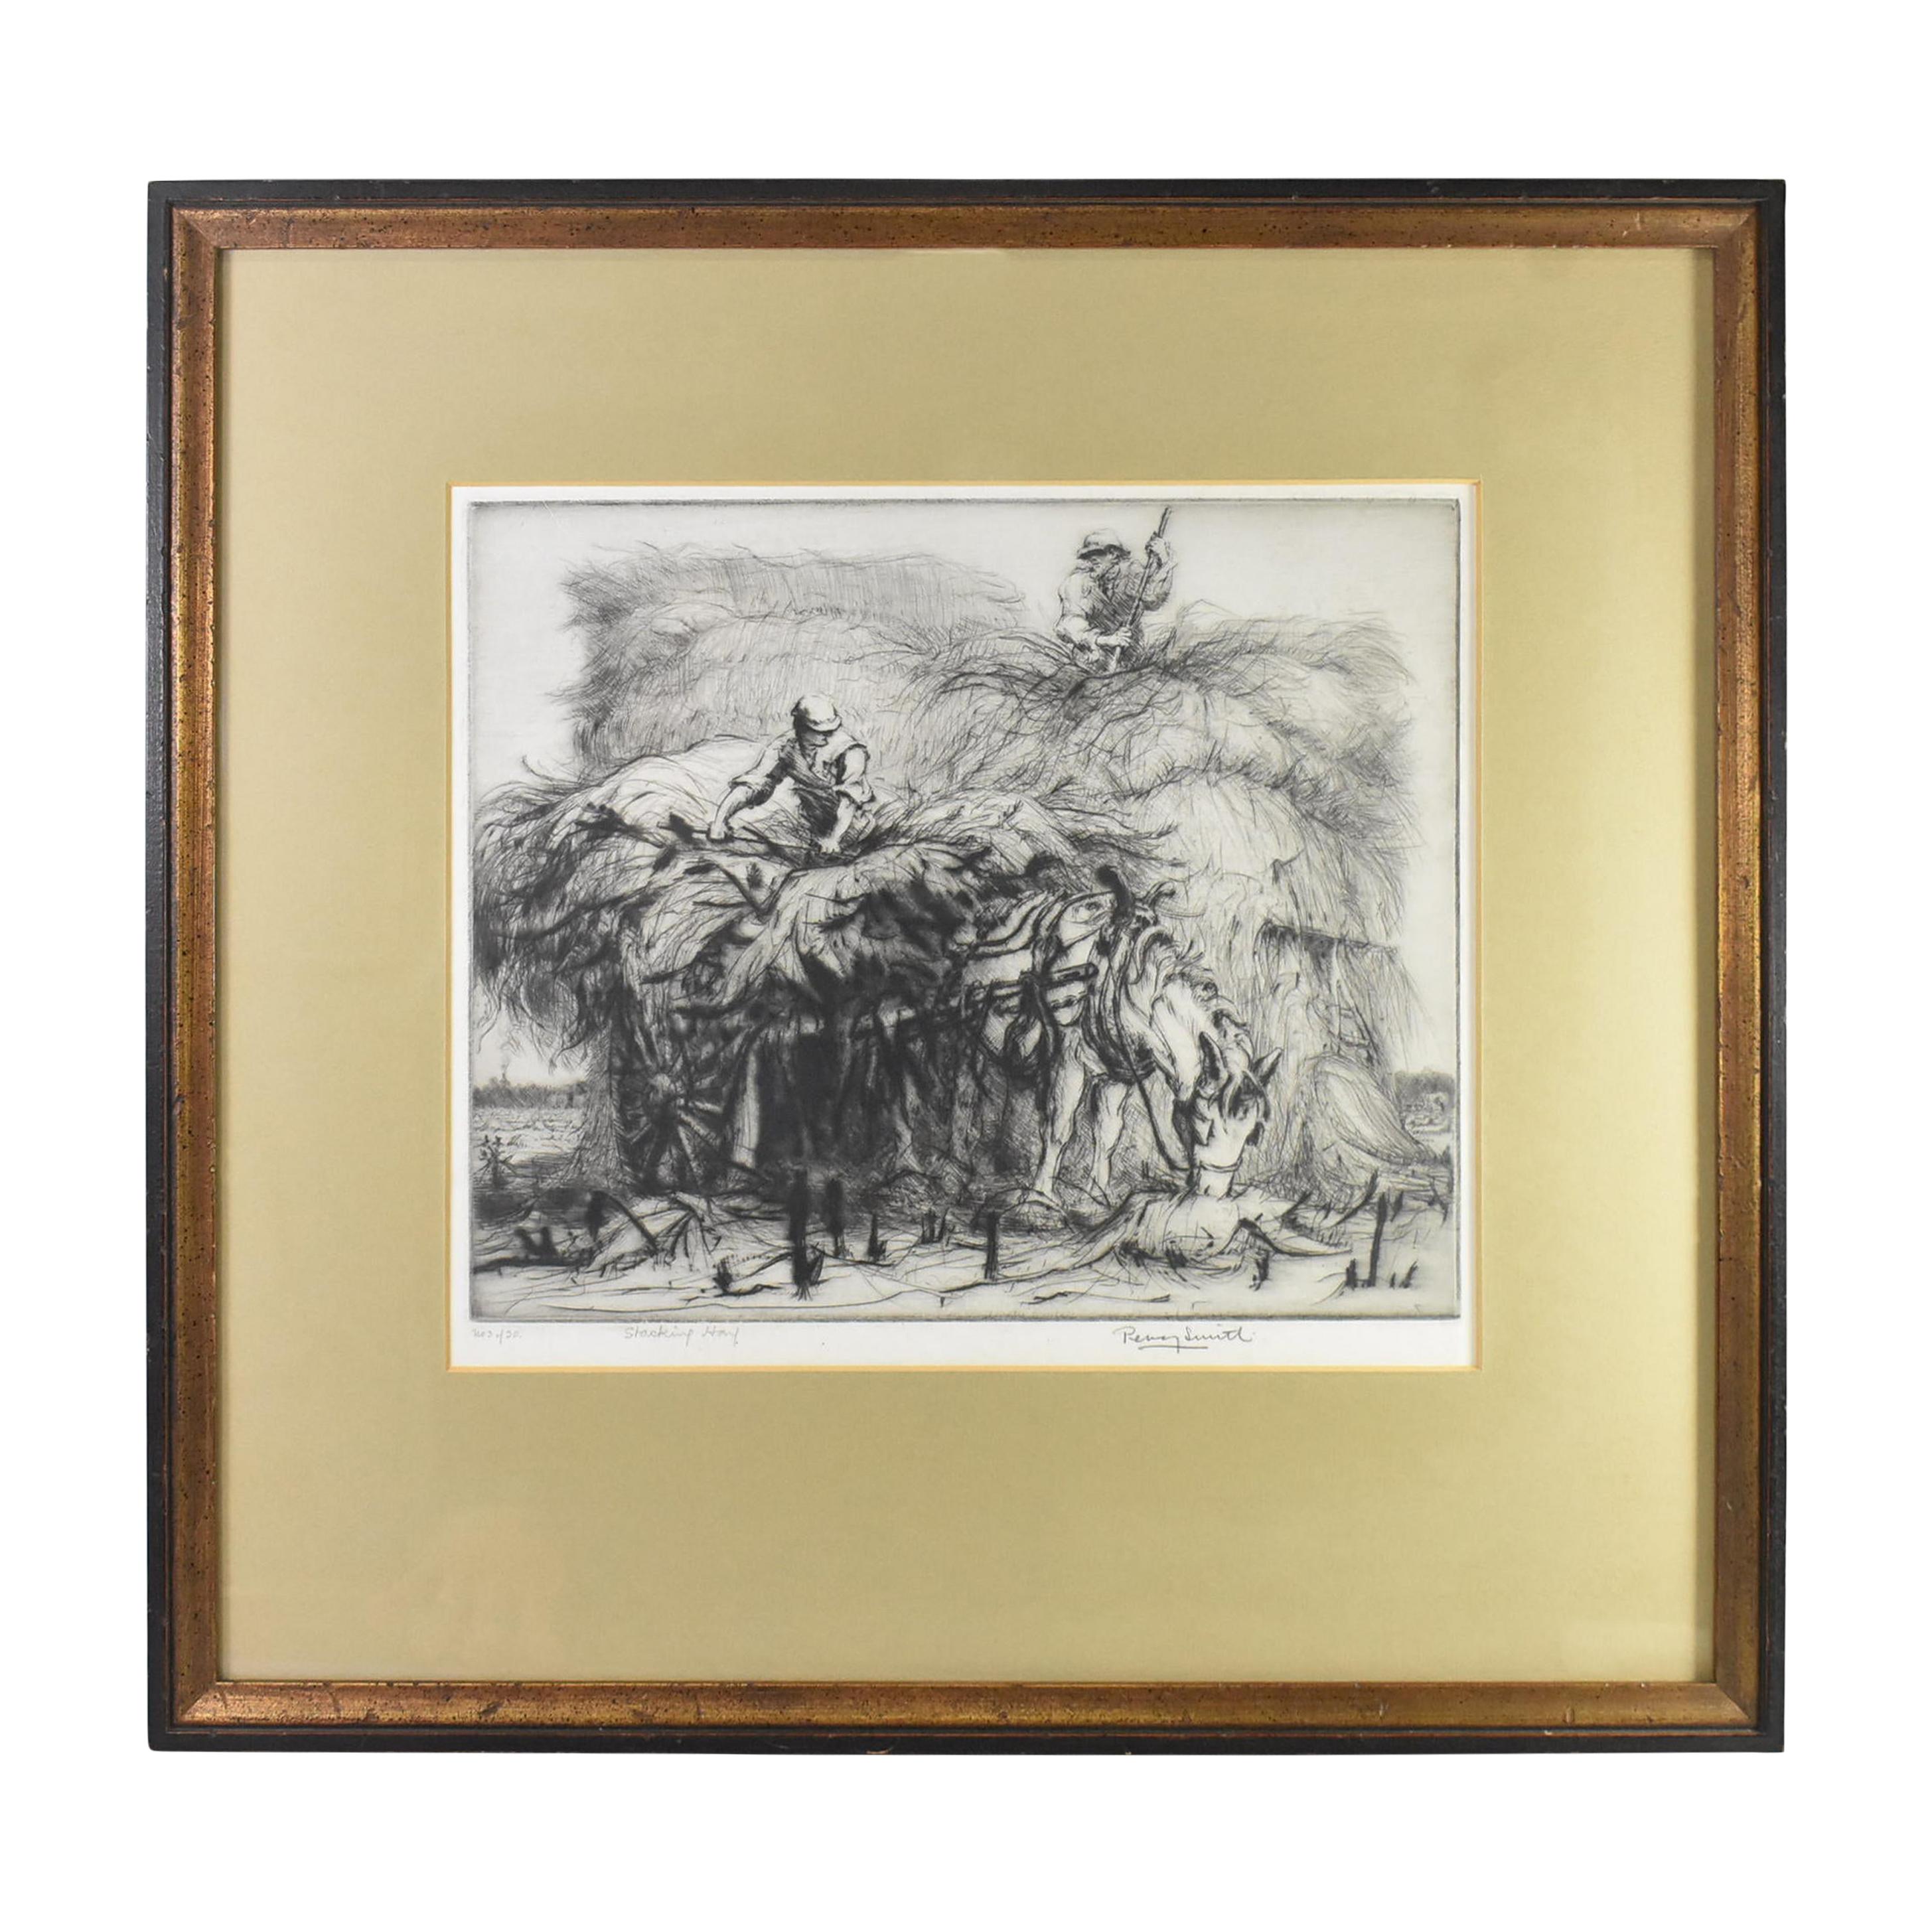 Percy John Delf Smith Engraving / Etching "Stacking Hay" 3/30 For Sale